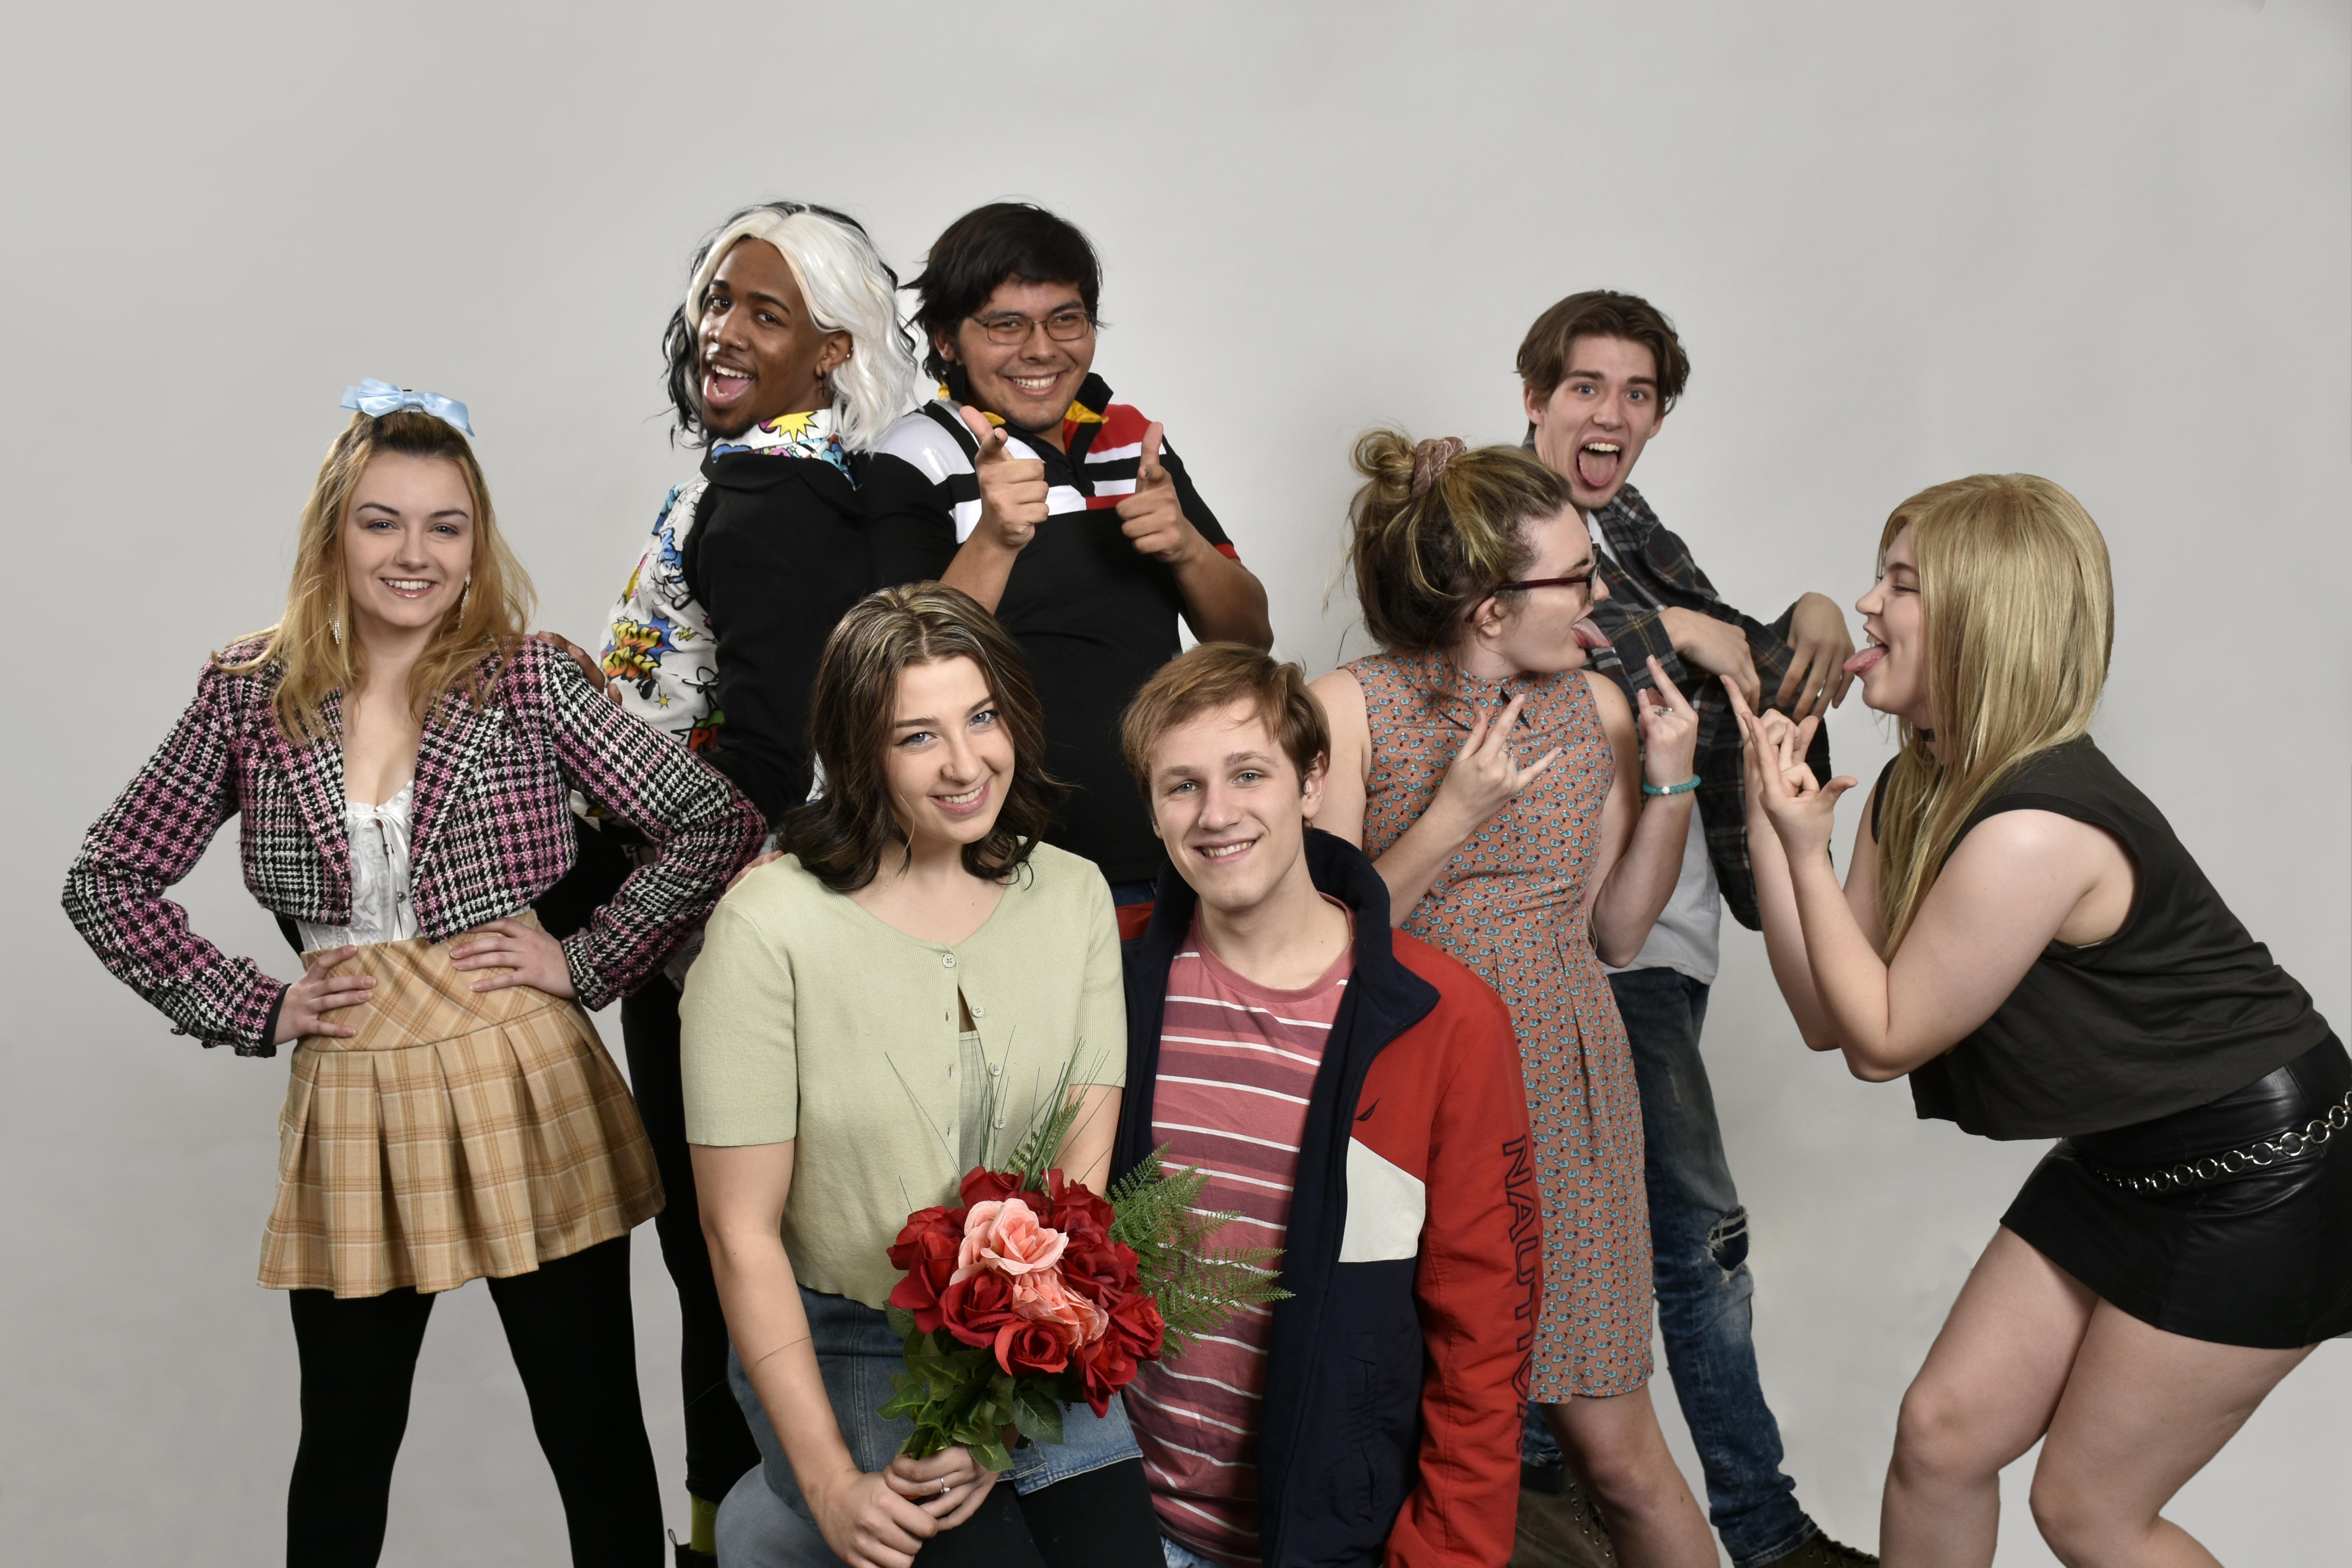 The cast of The Wedding Singer hams it up for a promotional photo